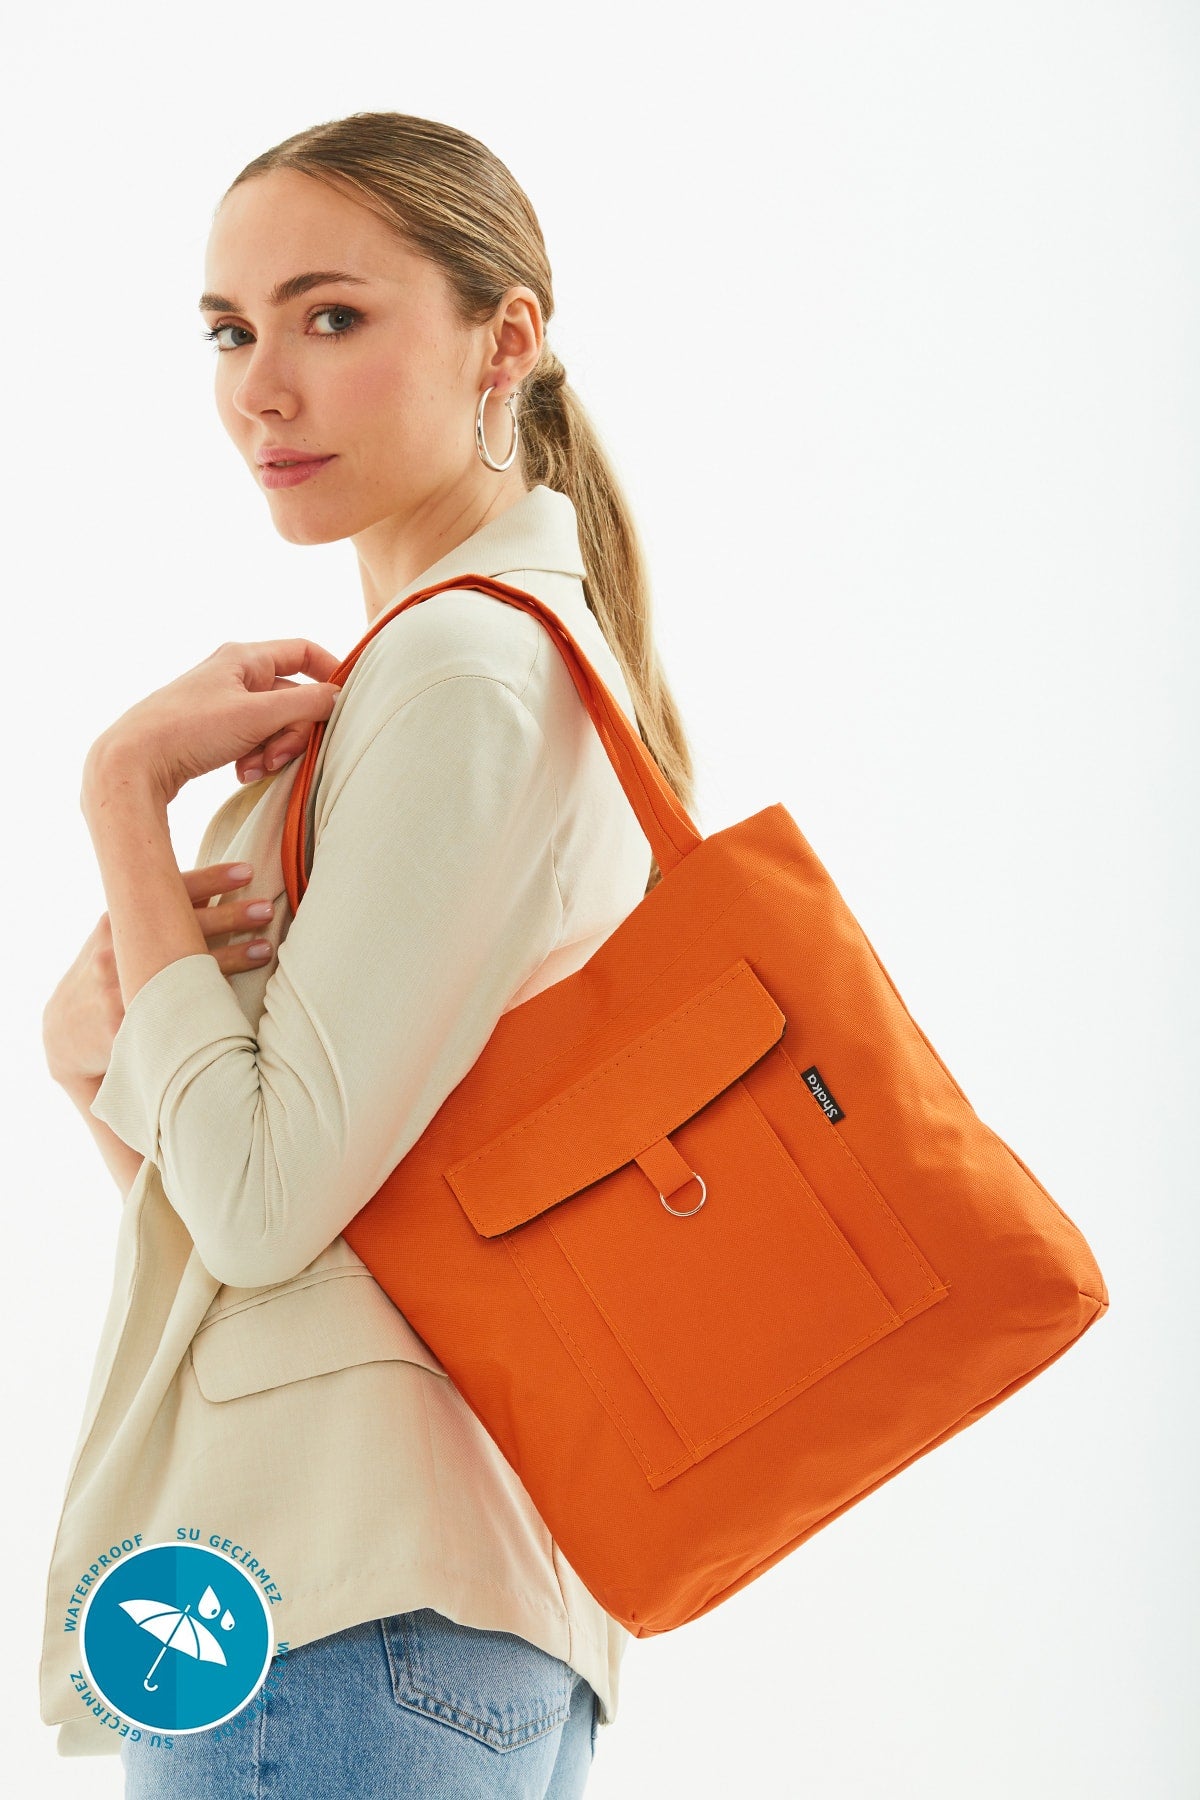 Orange U7 2-Compartment Large Volume Waterproof Fabric Women's Sports Daily Arm And Shoulder Bag B:35 E:35